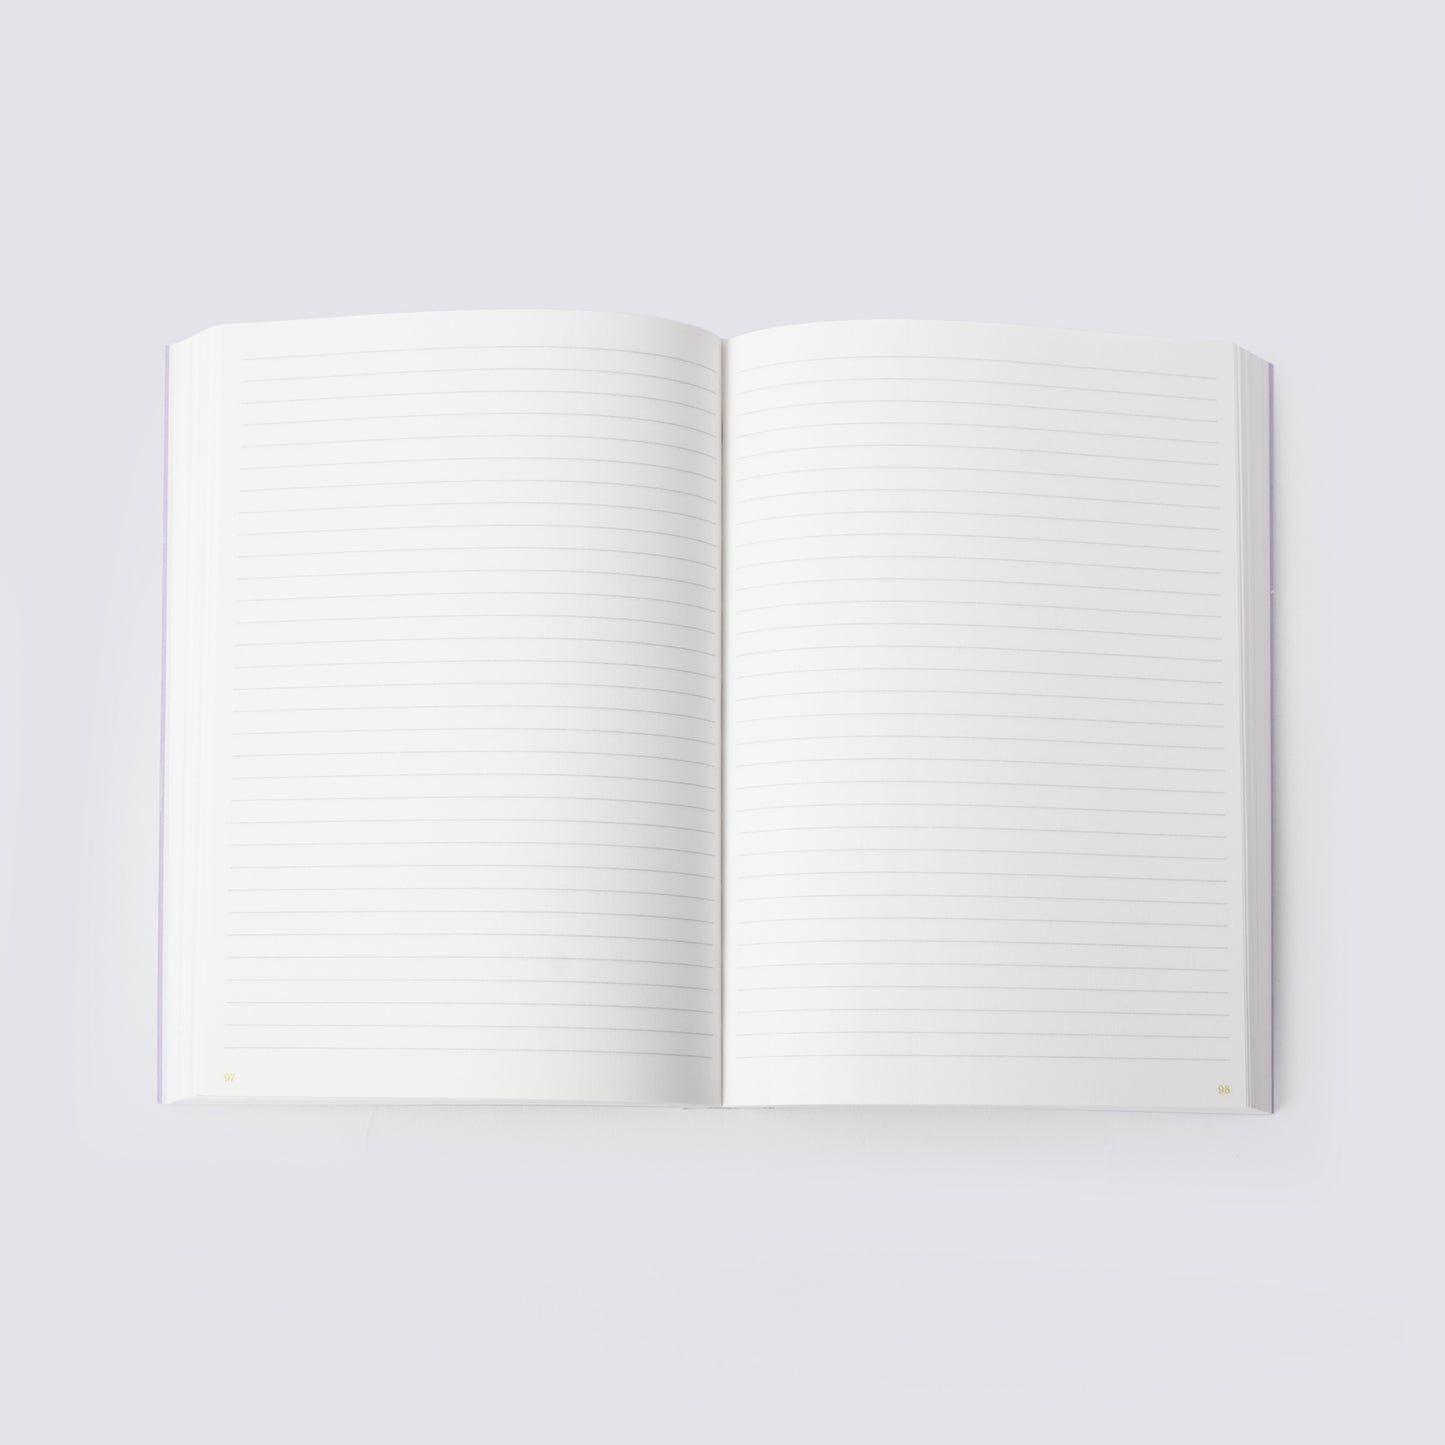 Yolk Notebook, Pen and Band Trio - Everyday Pen / Ruled Paper